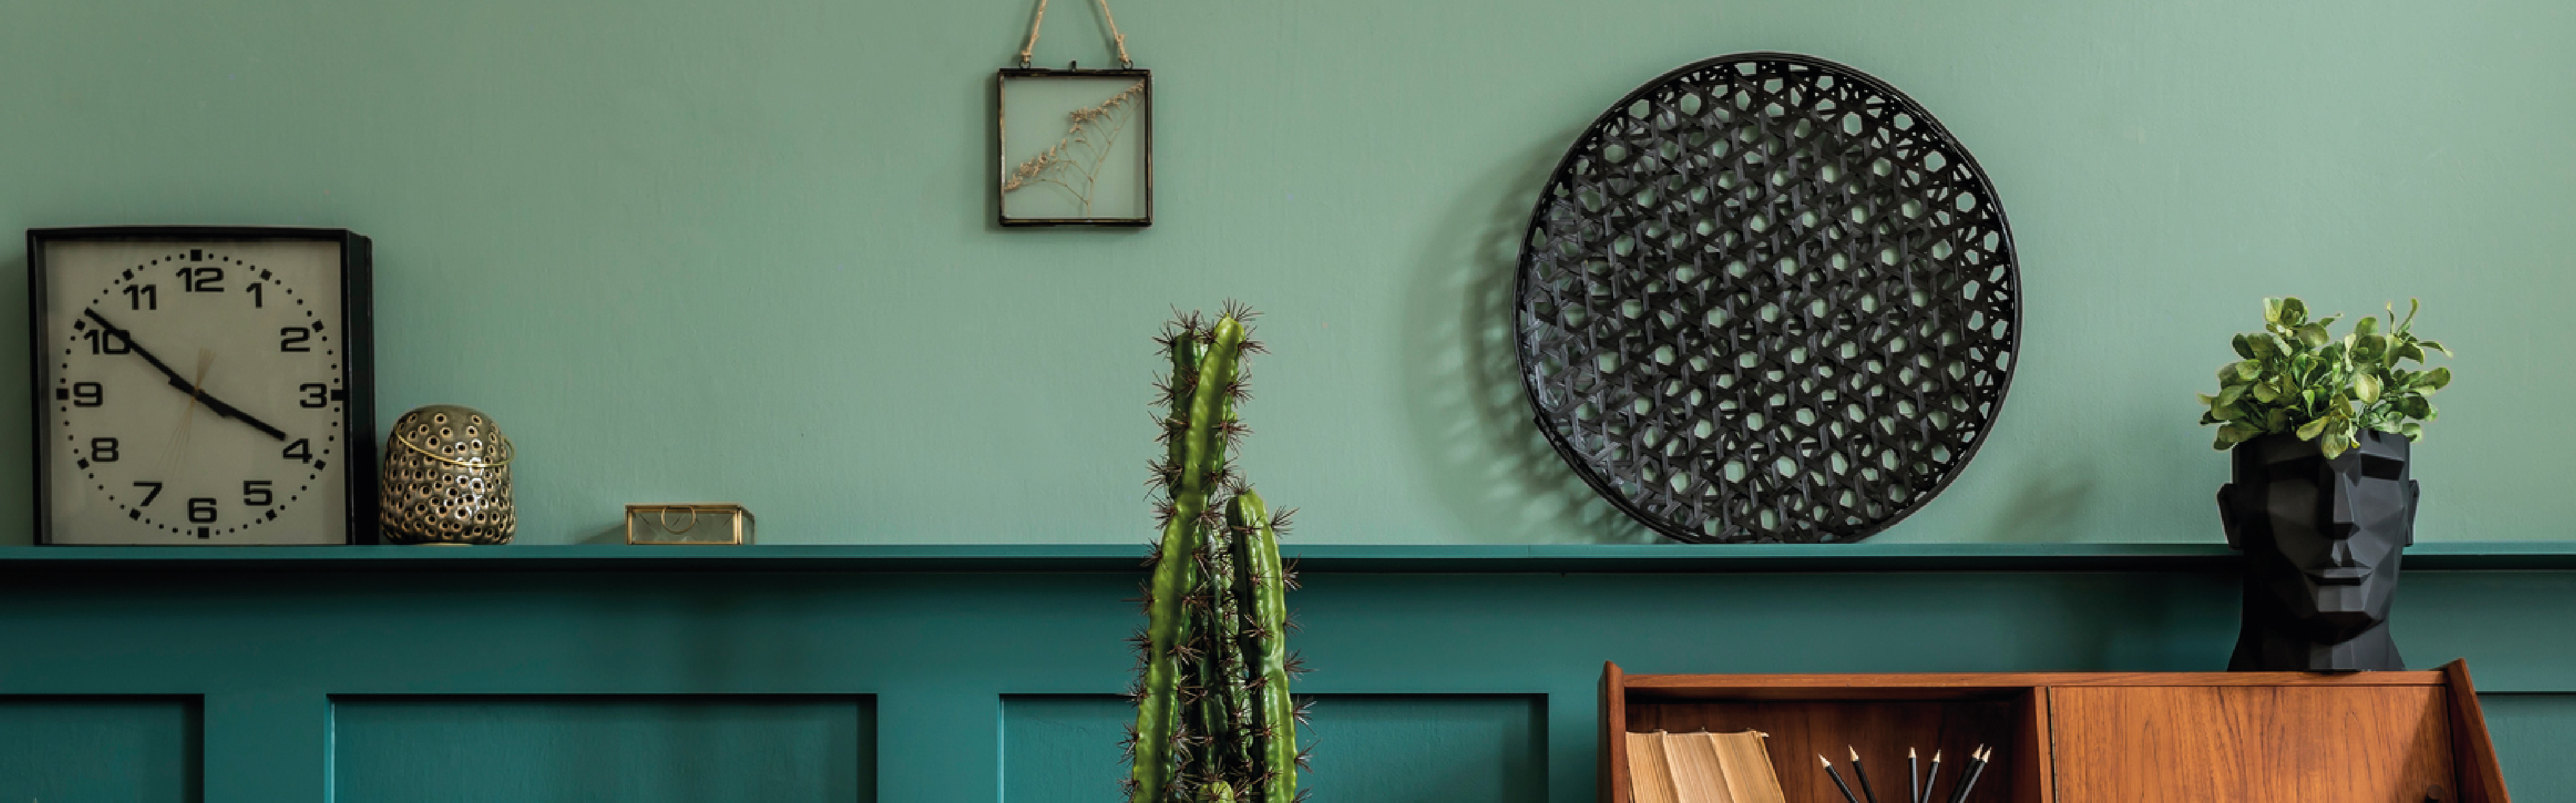 cacti in a living room